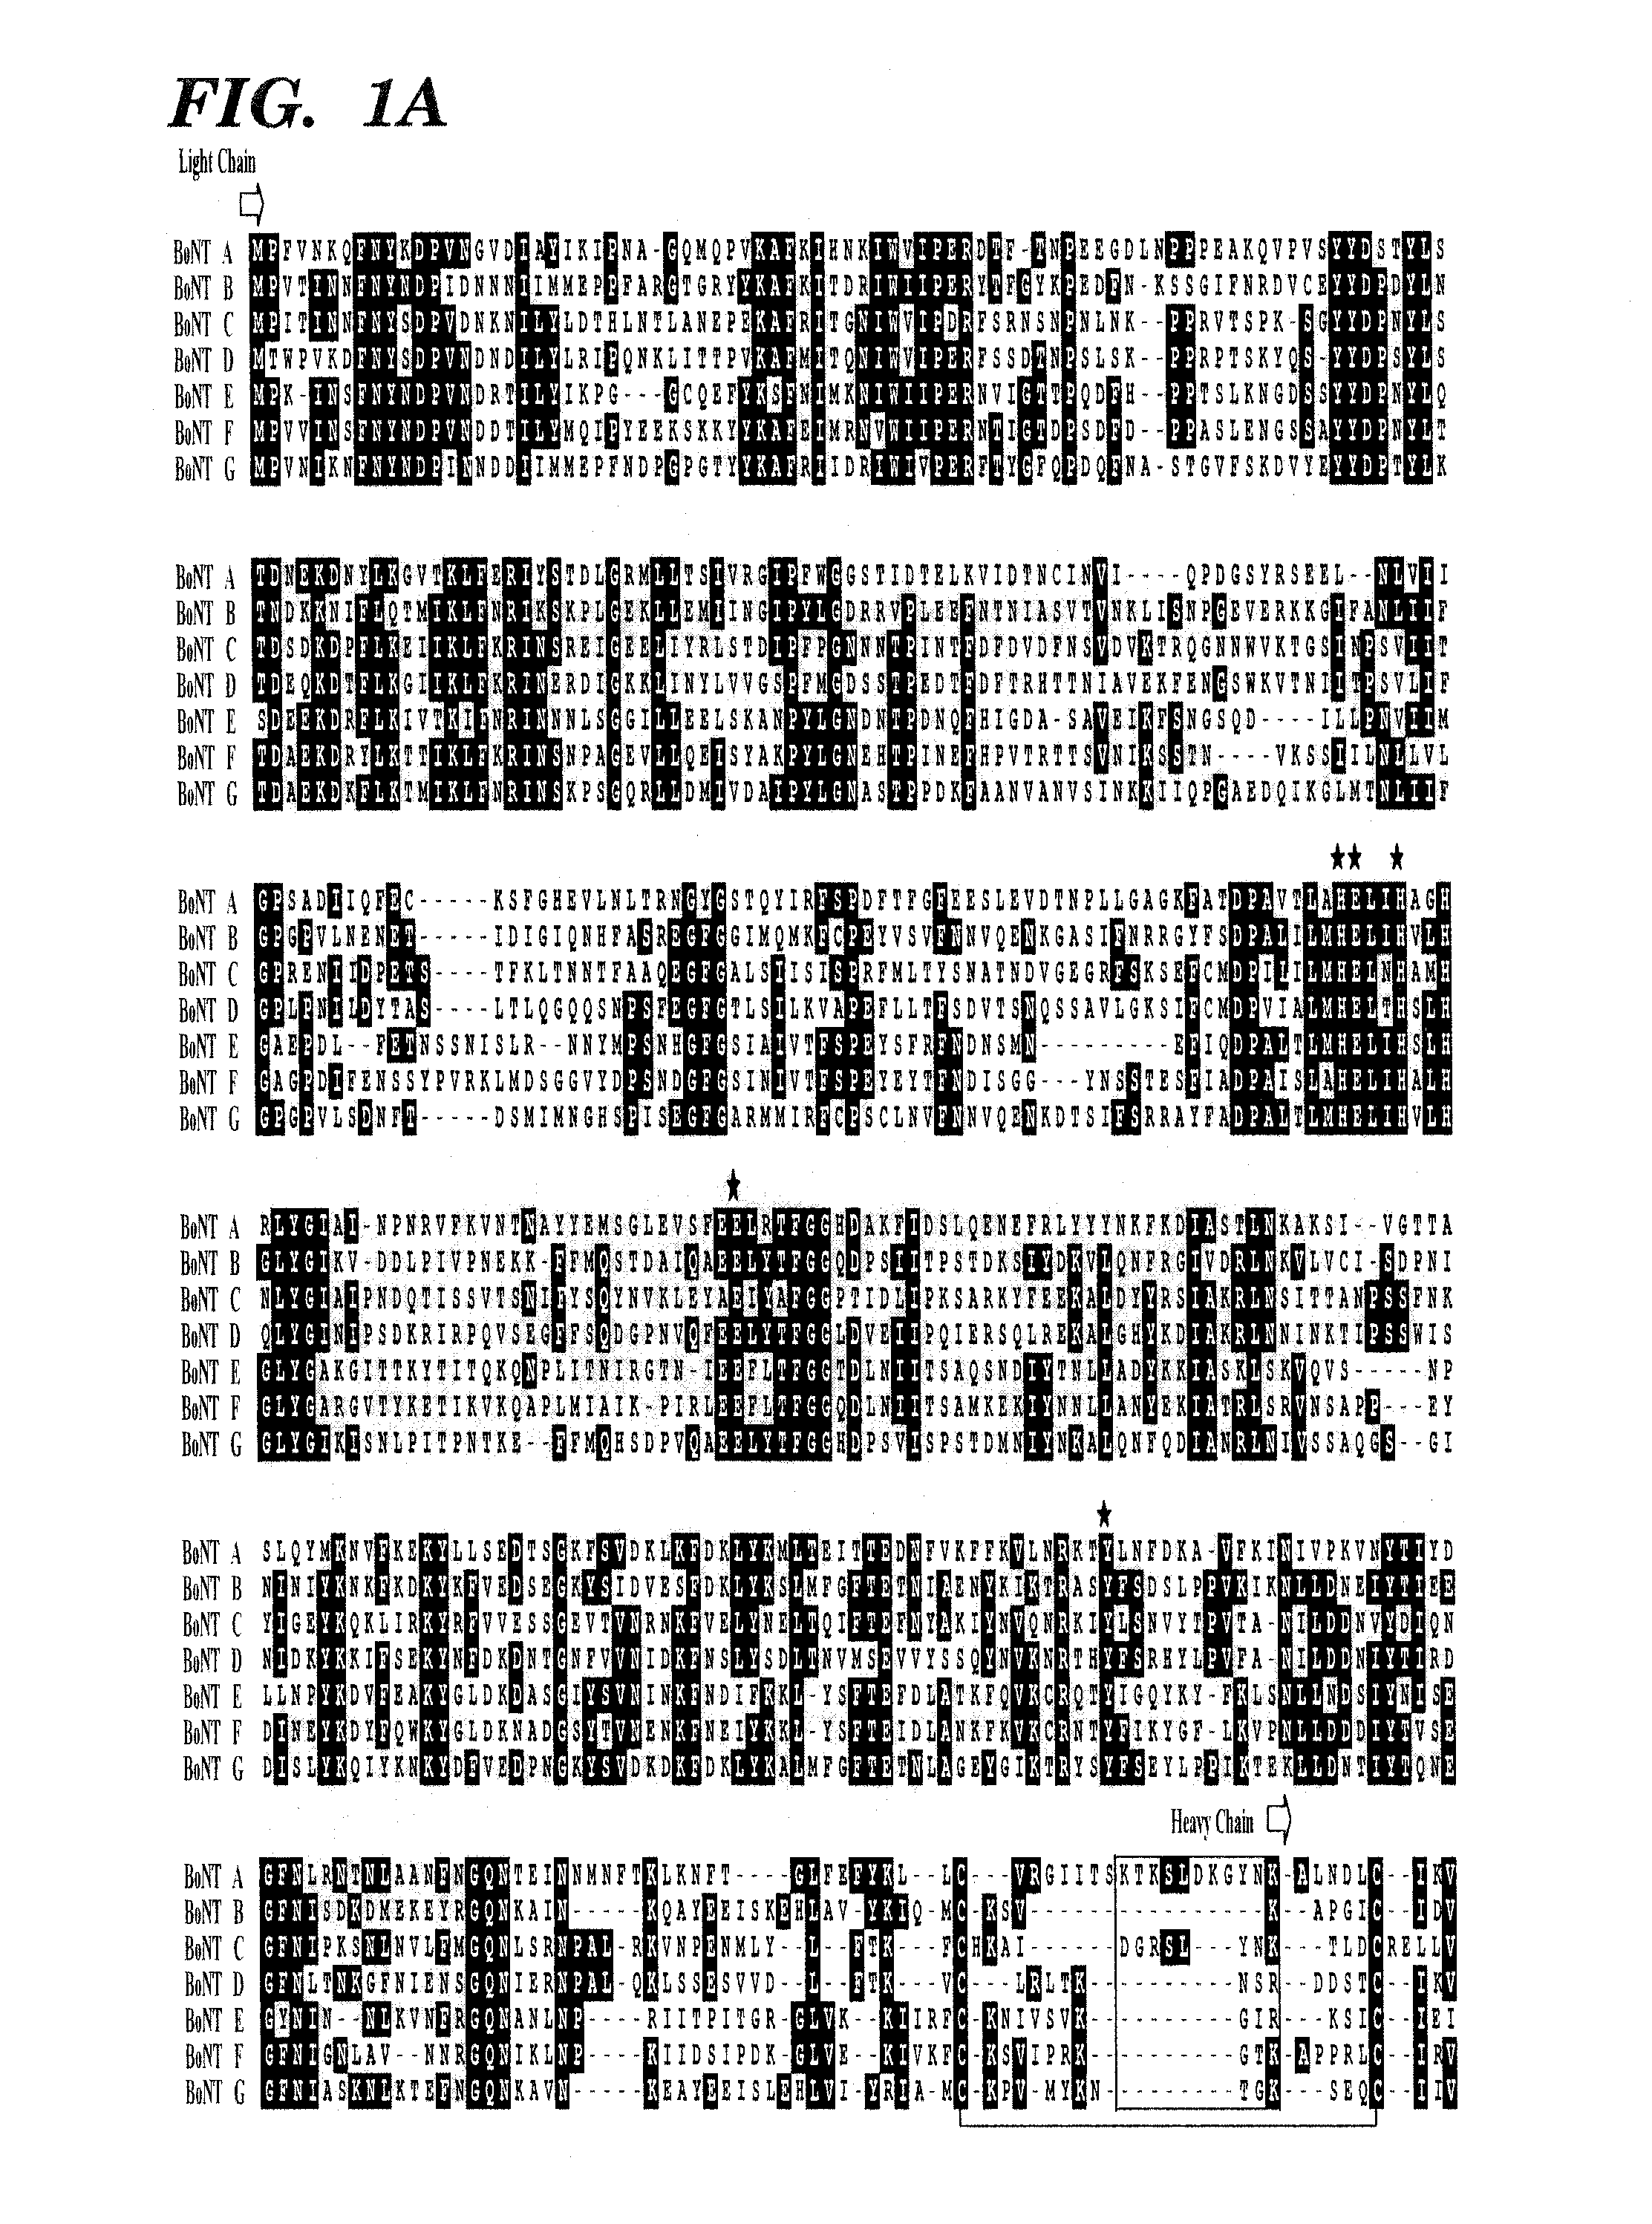 Genetically engineered clostridial genes, proteins encoded by the engineered genes, and uses thereof